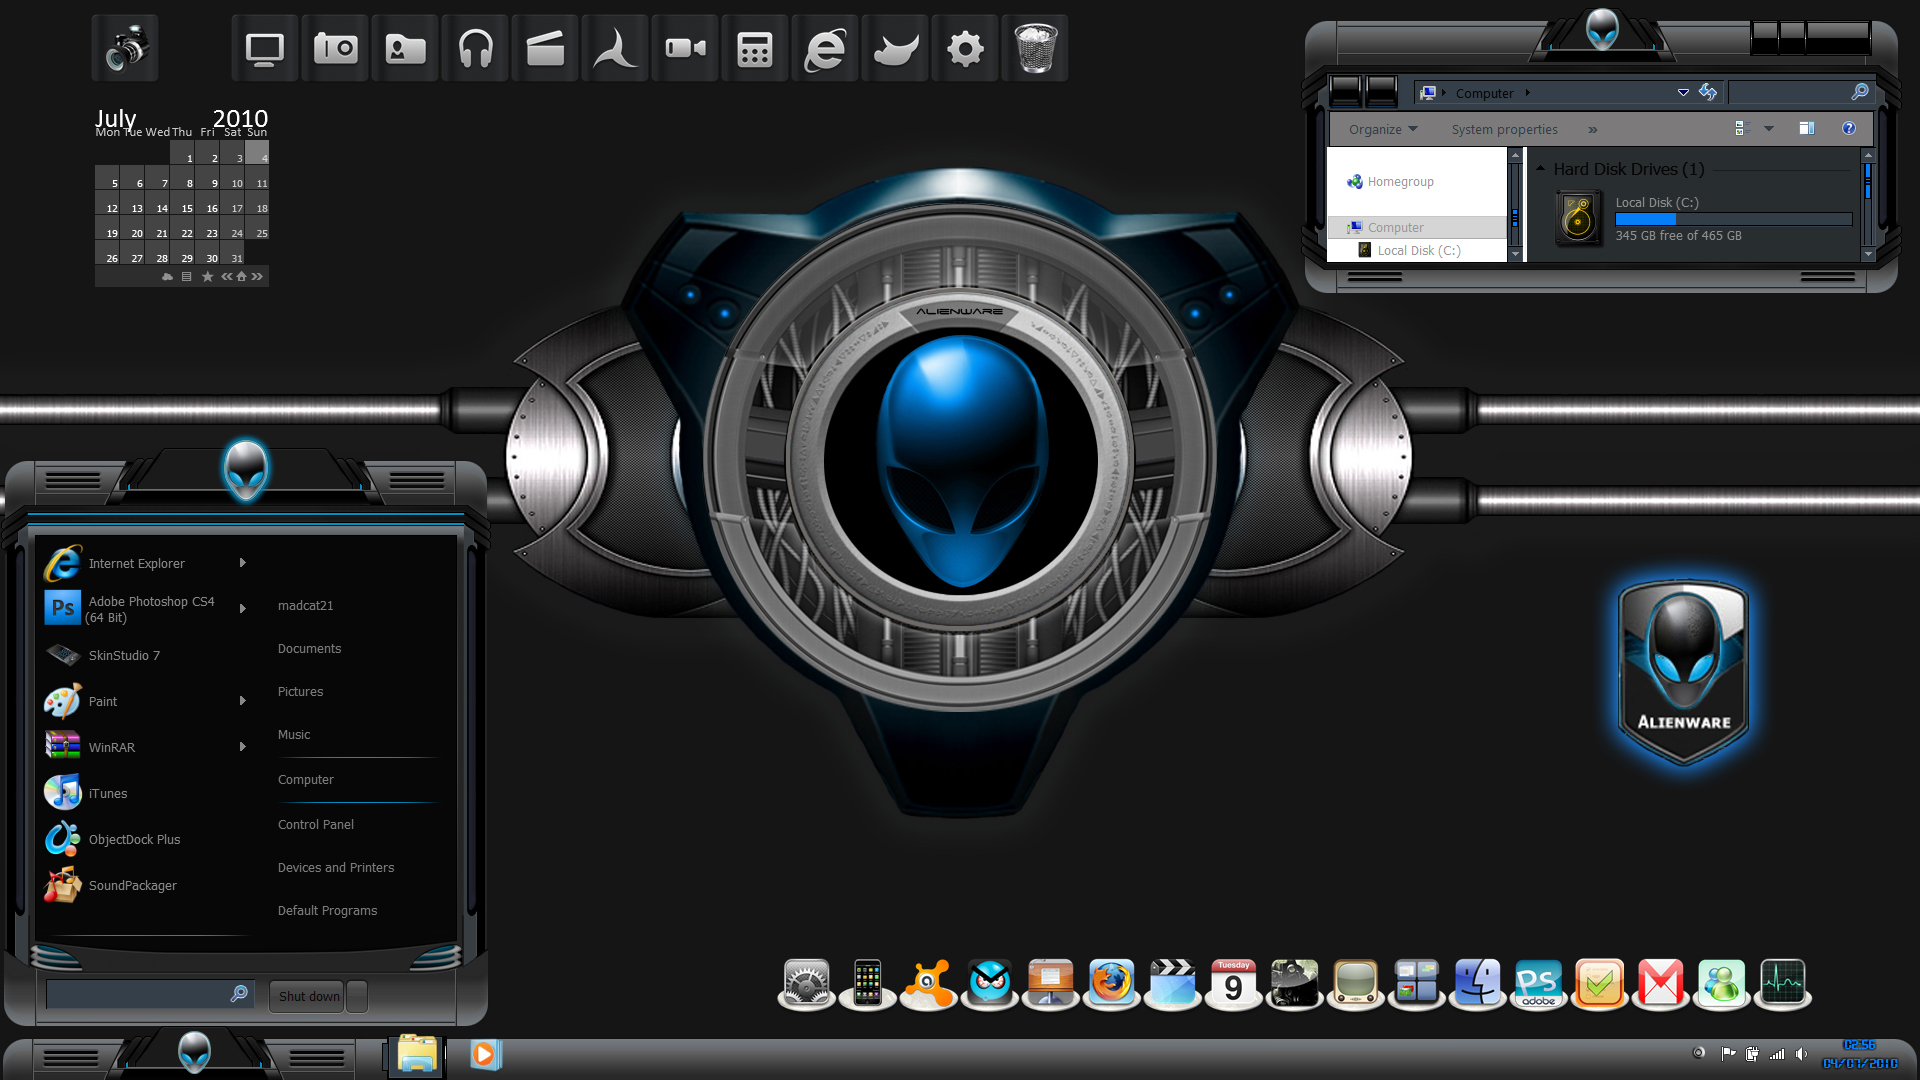  alienware is one of the most downloaded windows blind for windows 7